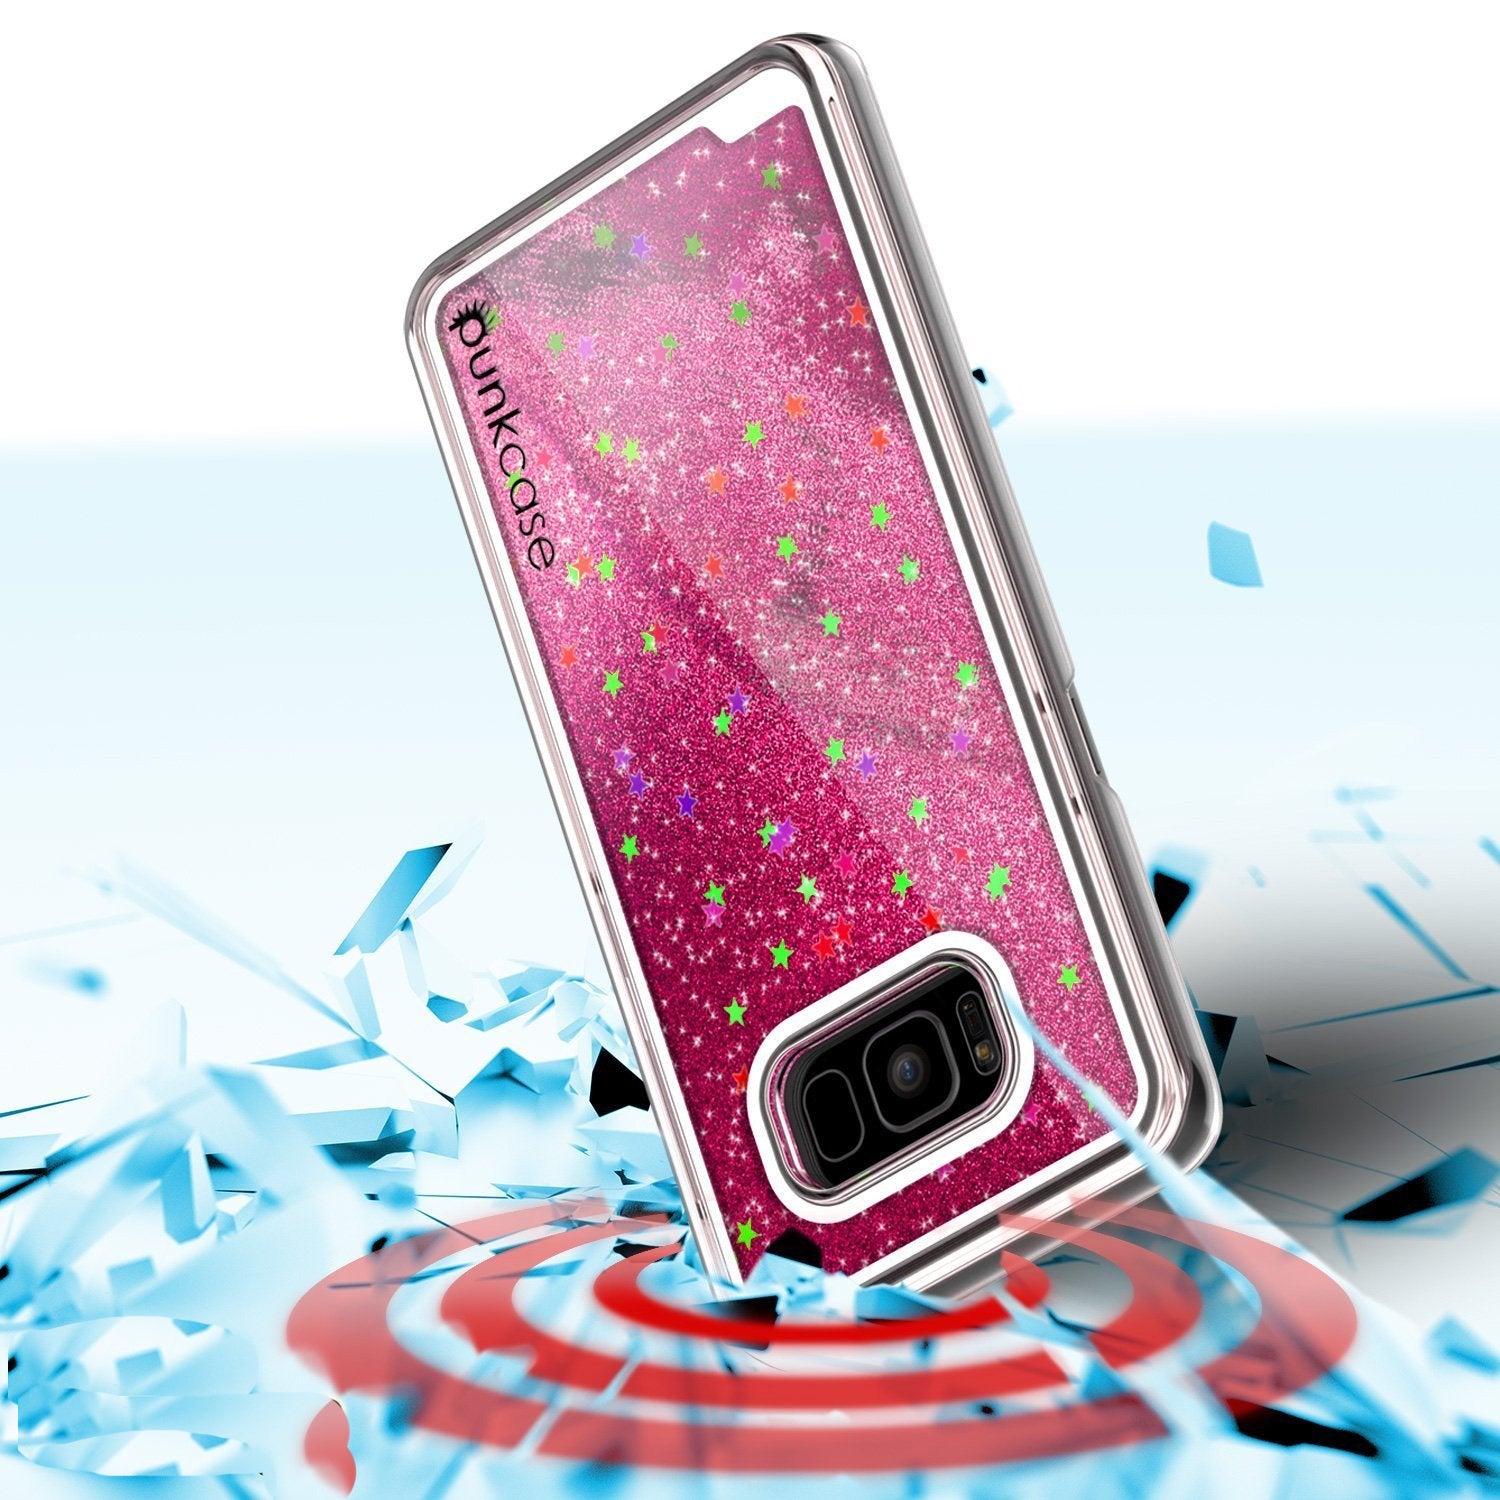 Galaxy S8 Case, Punkcase Liquid Pink Series Protective Dual Layer Floating Glitter Cover